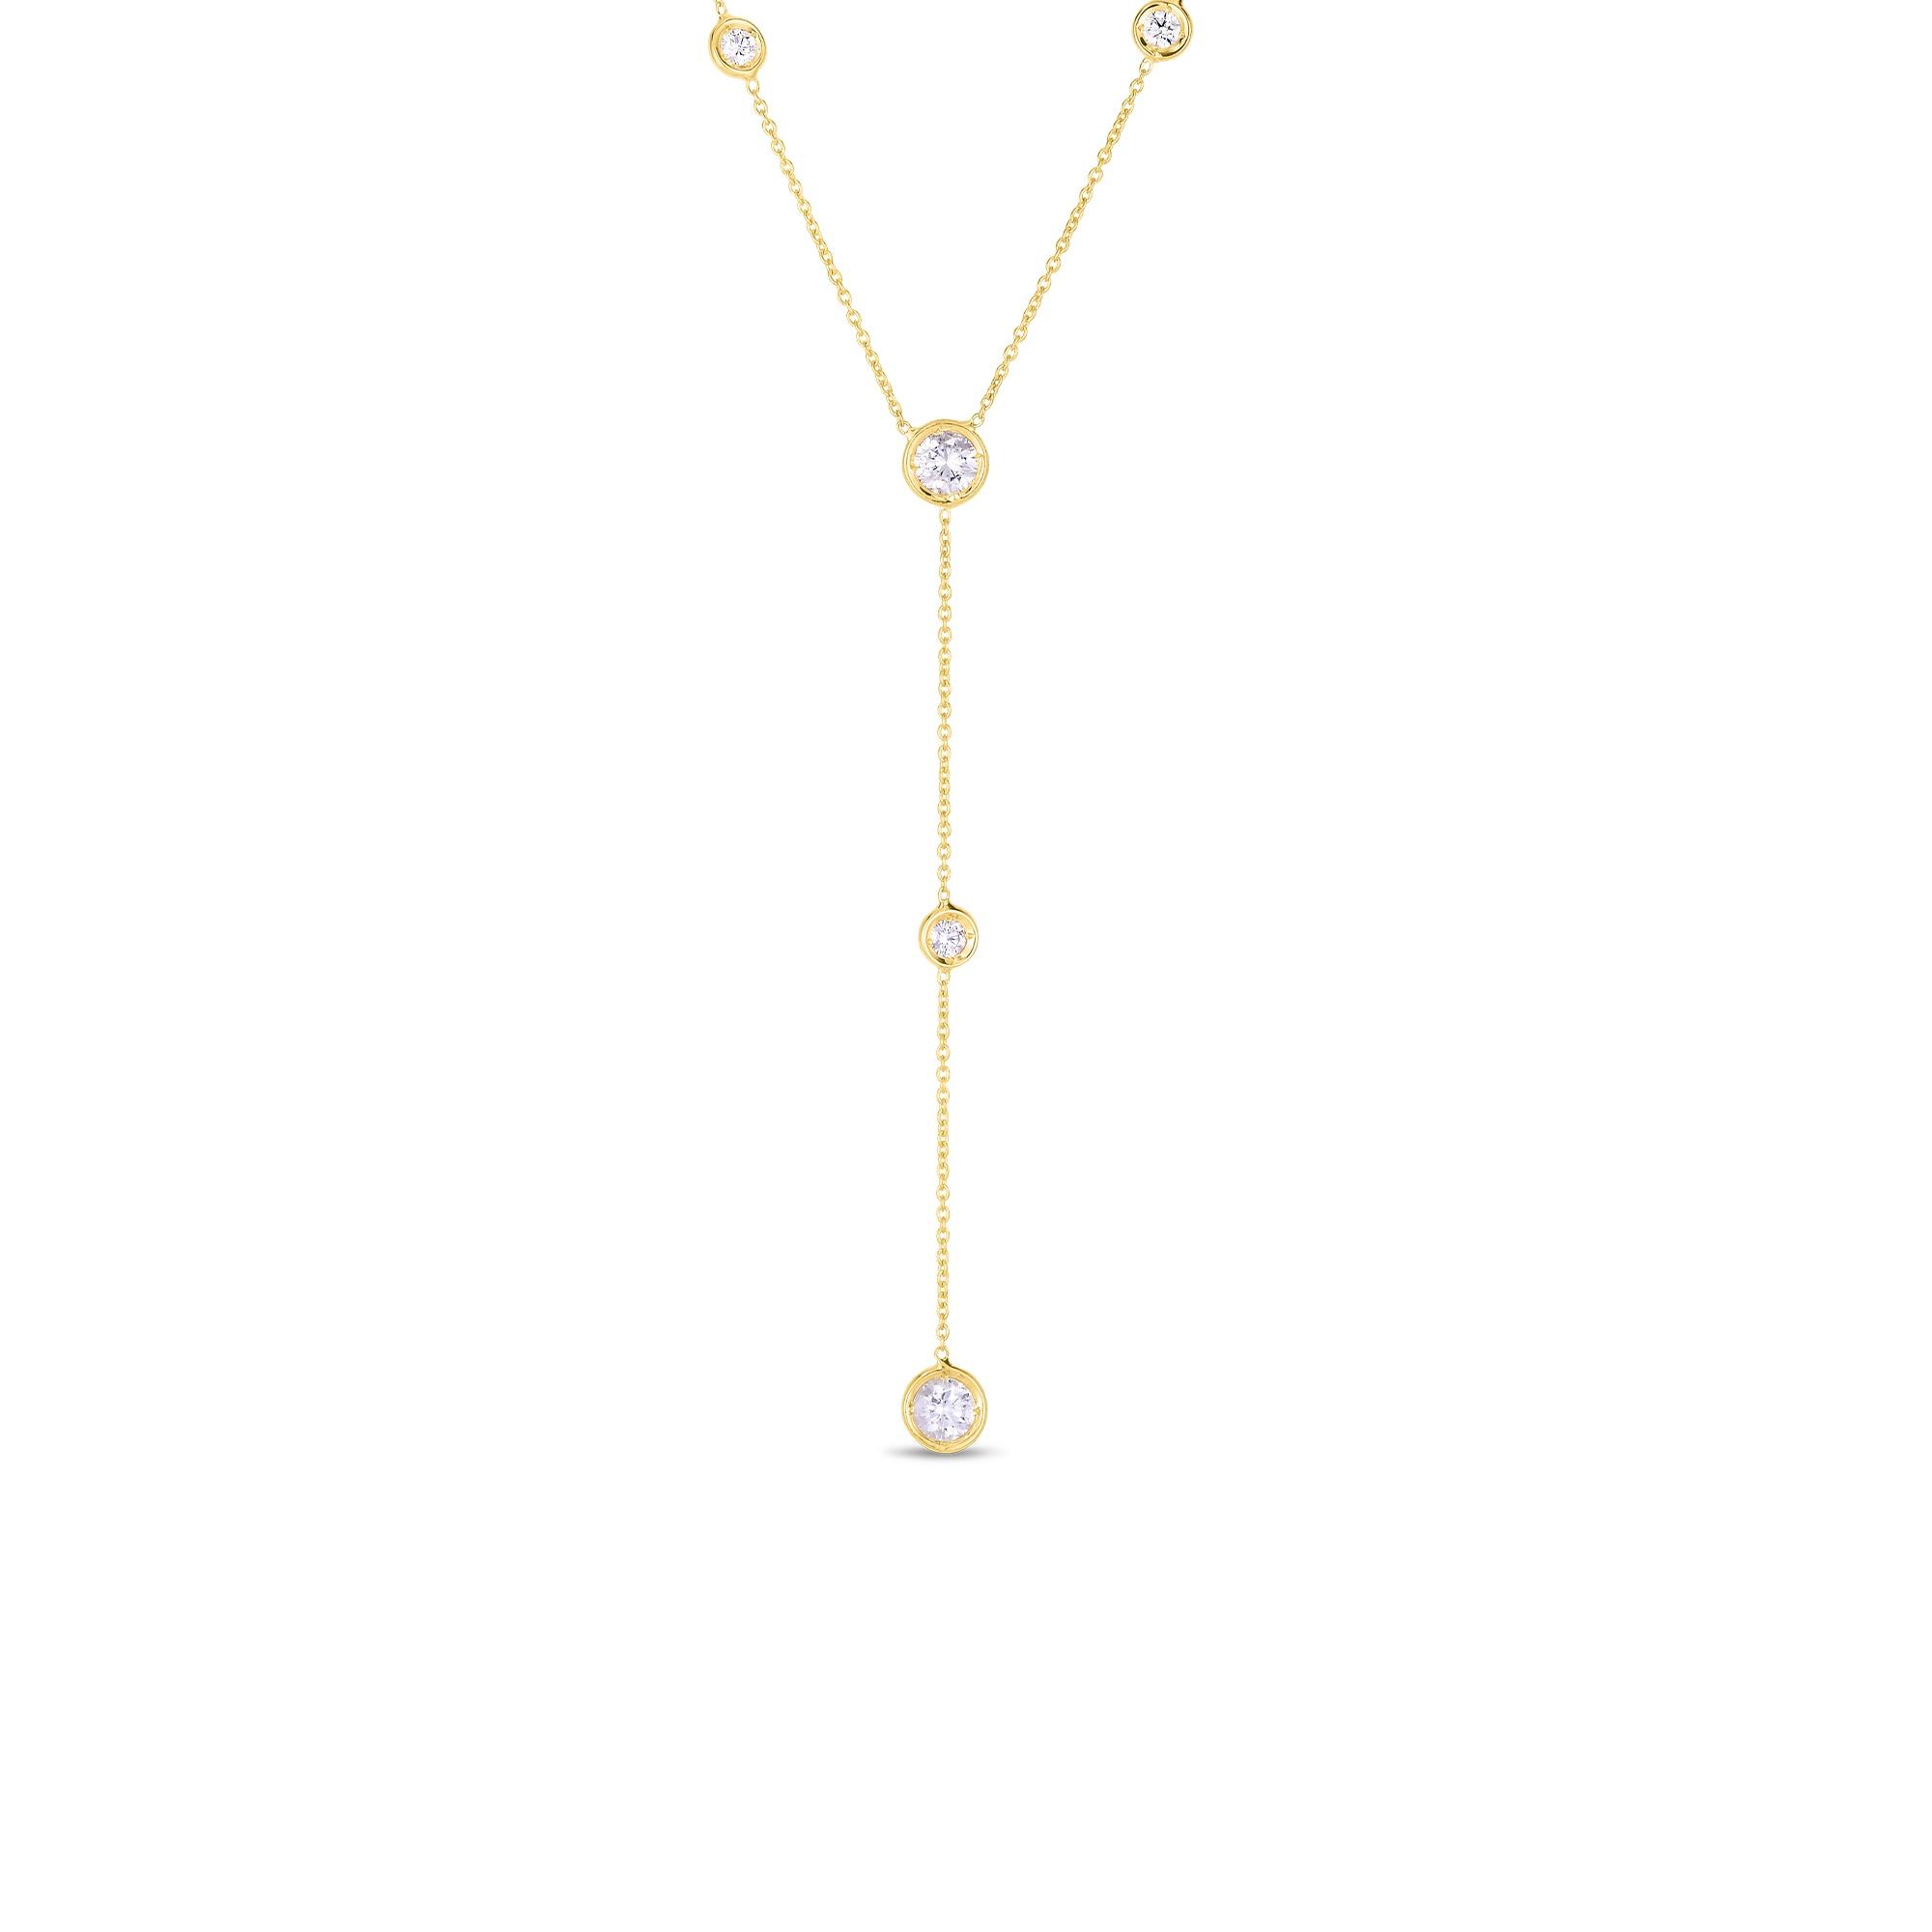  Roberto Coin Diamonds by the Inch 5-Station Y Necklace